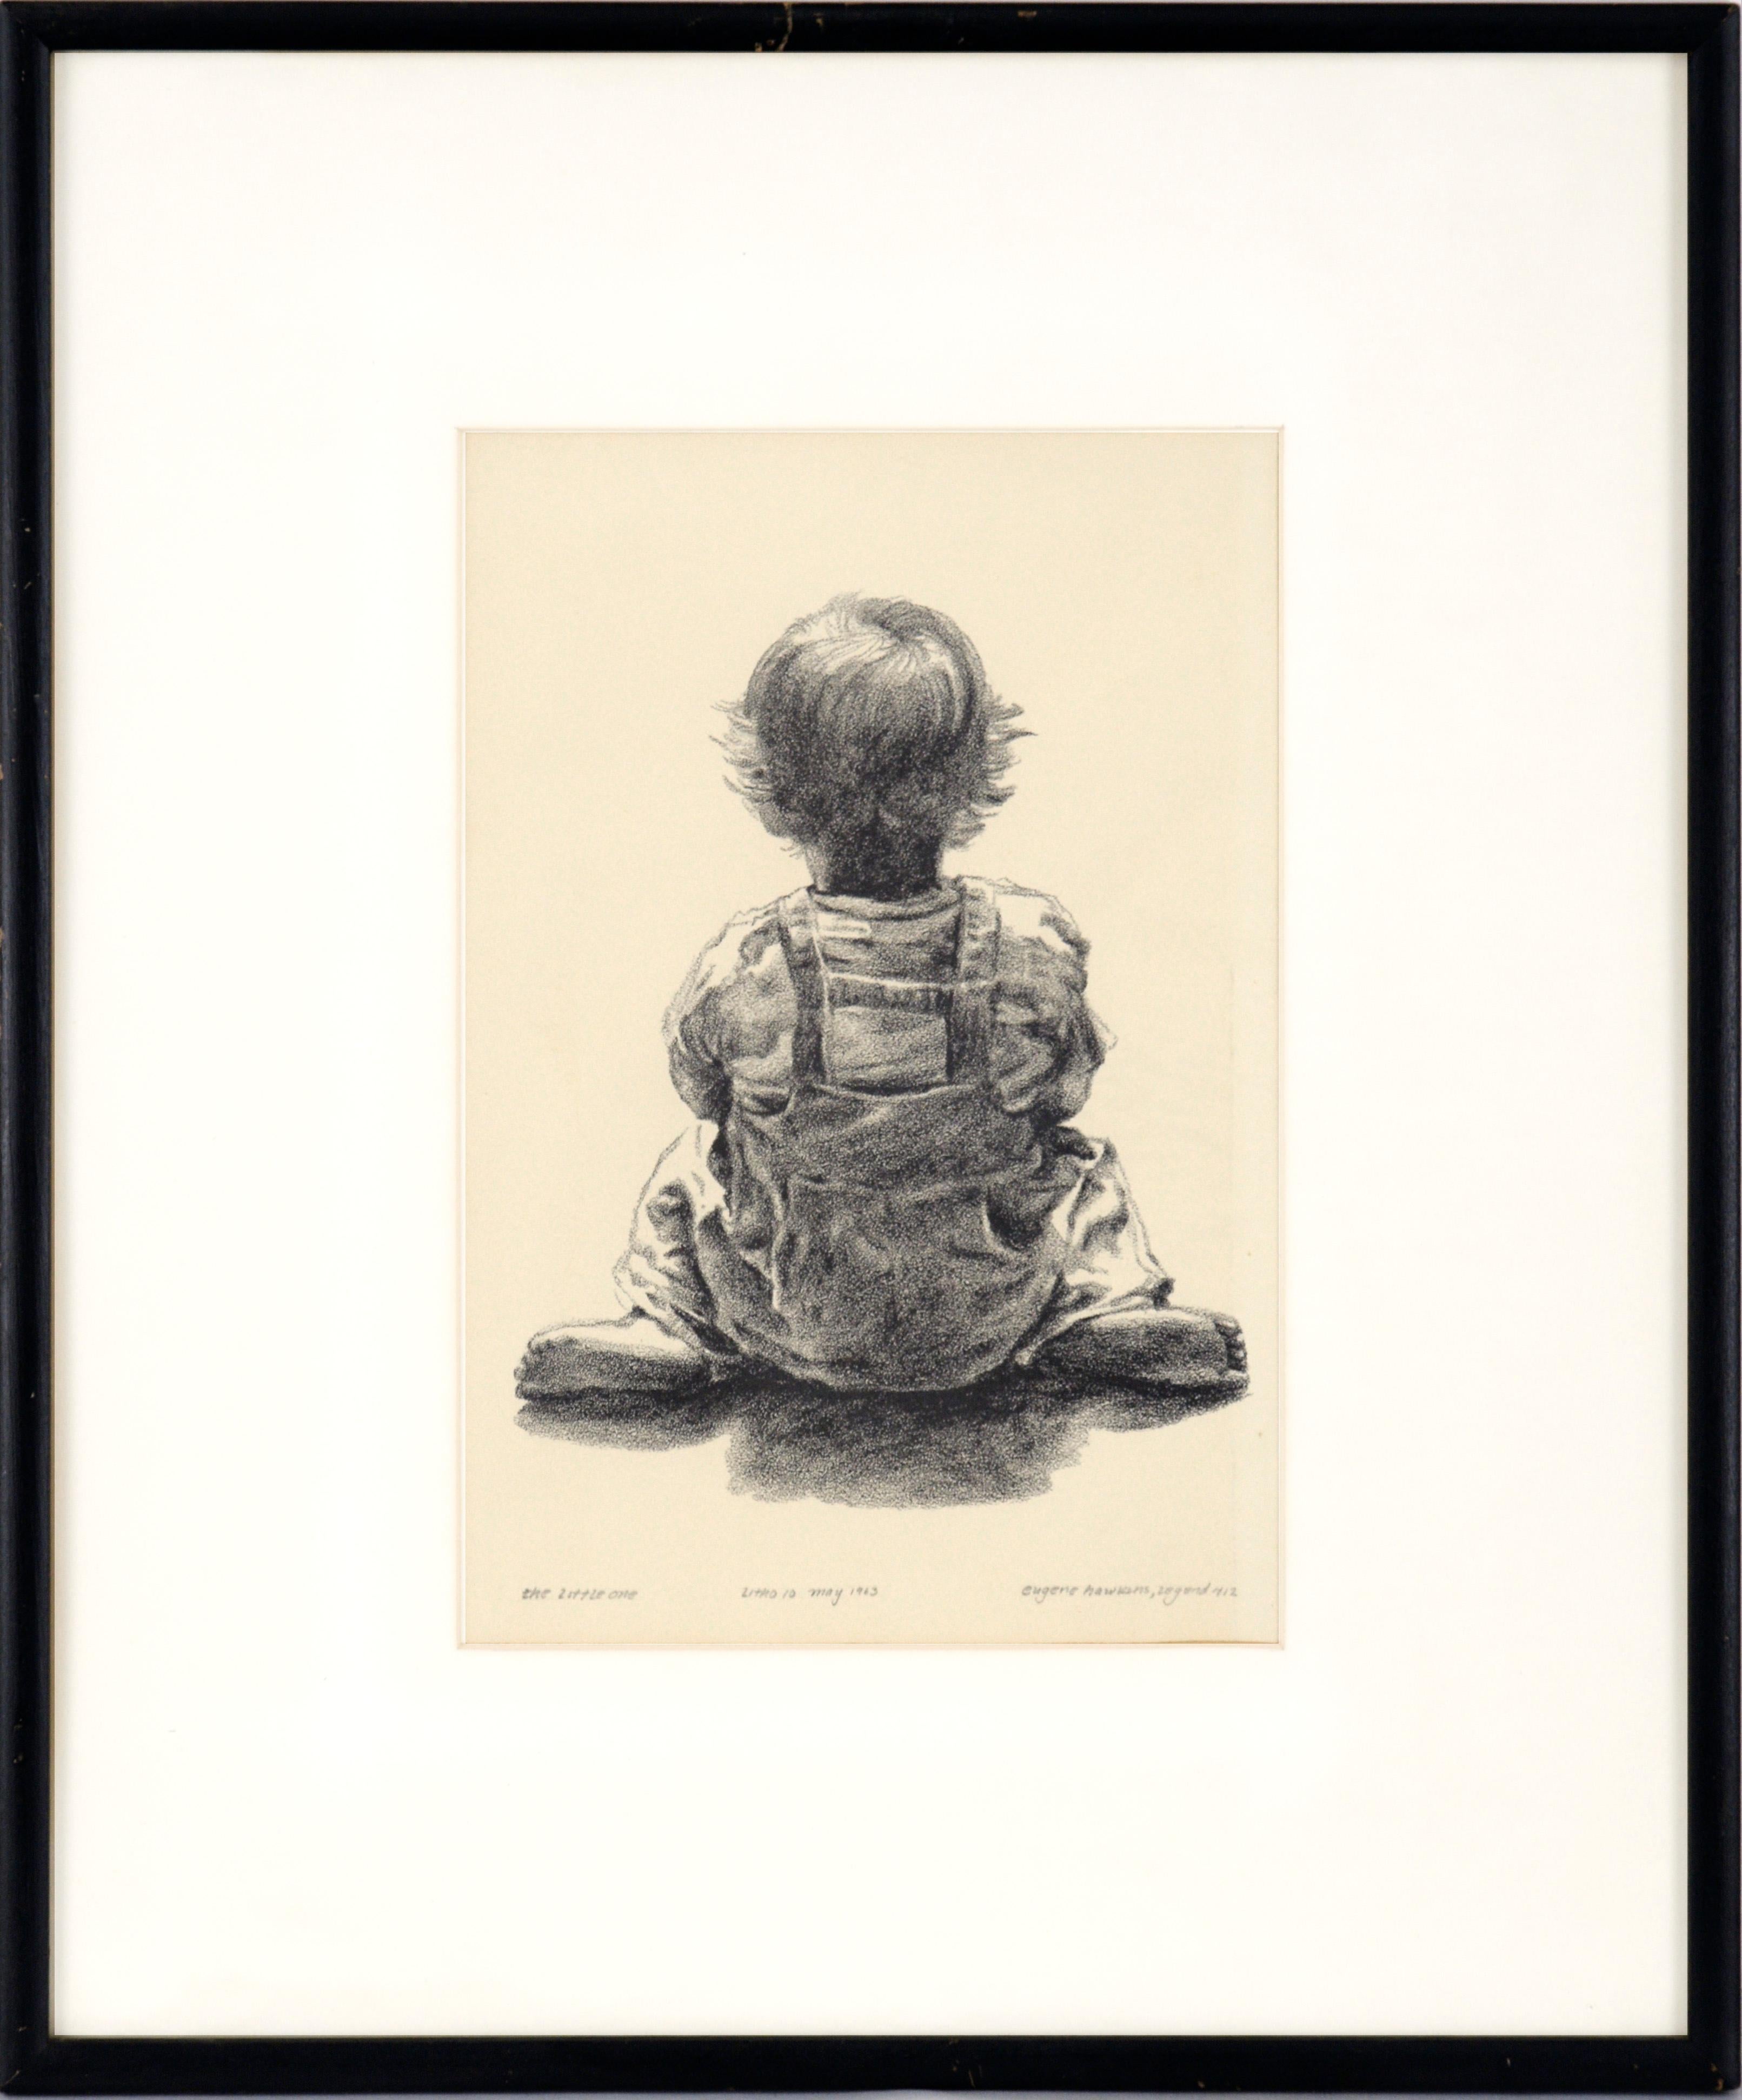 Eugene Hawkins Figurative Print - "The Little One" - Rare Signed Figurative Lithograph in Ink on Paper